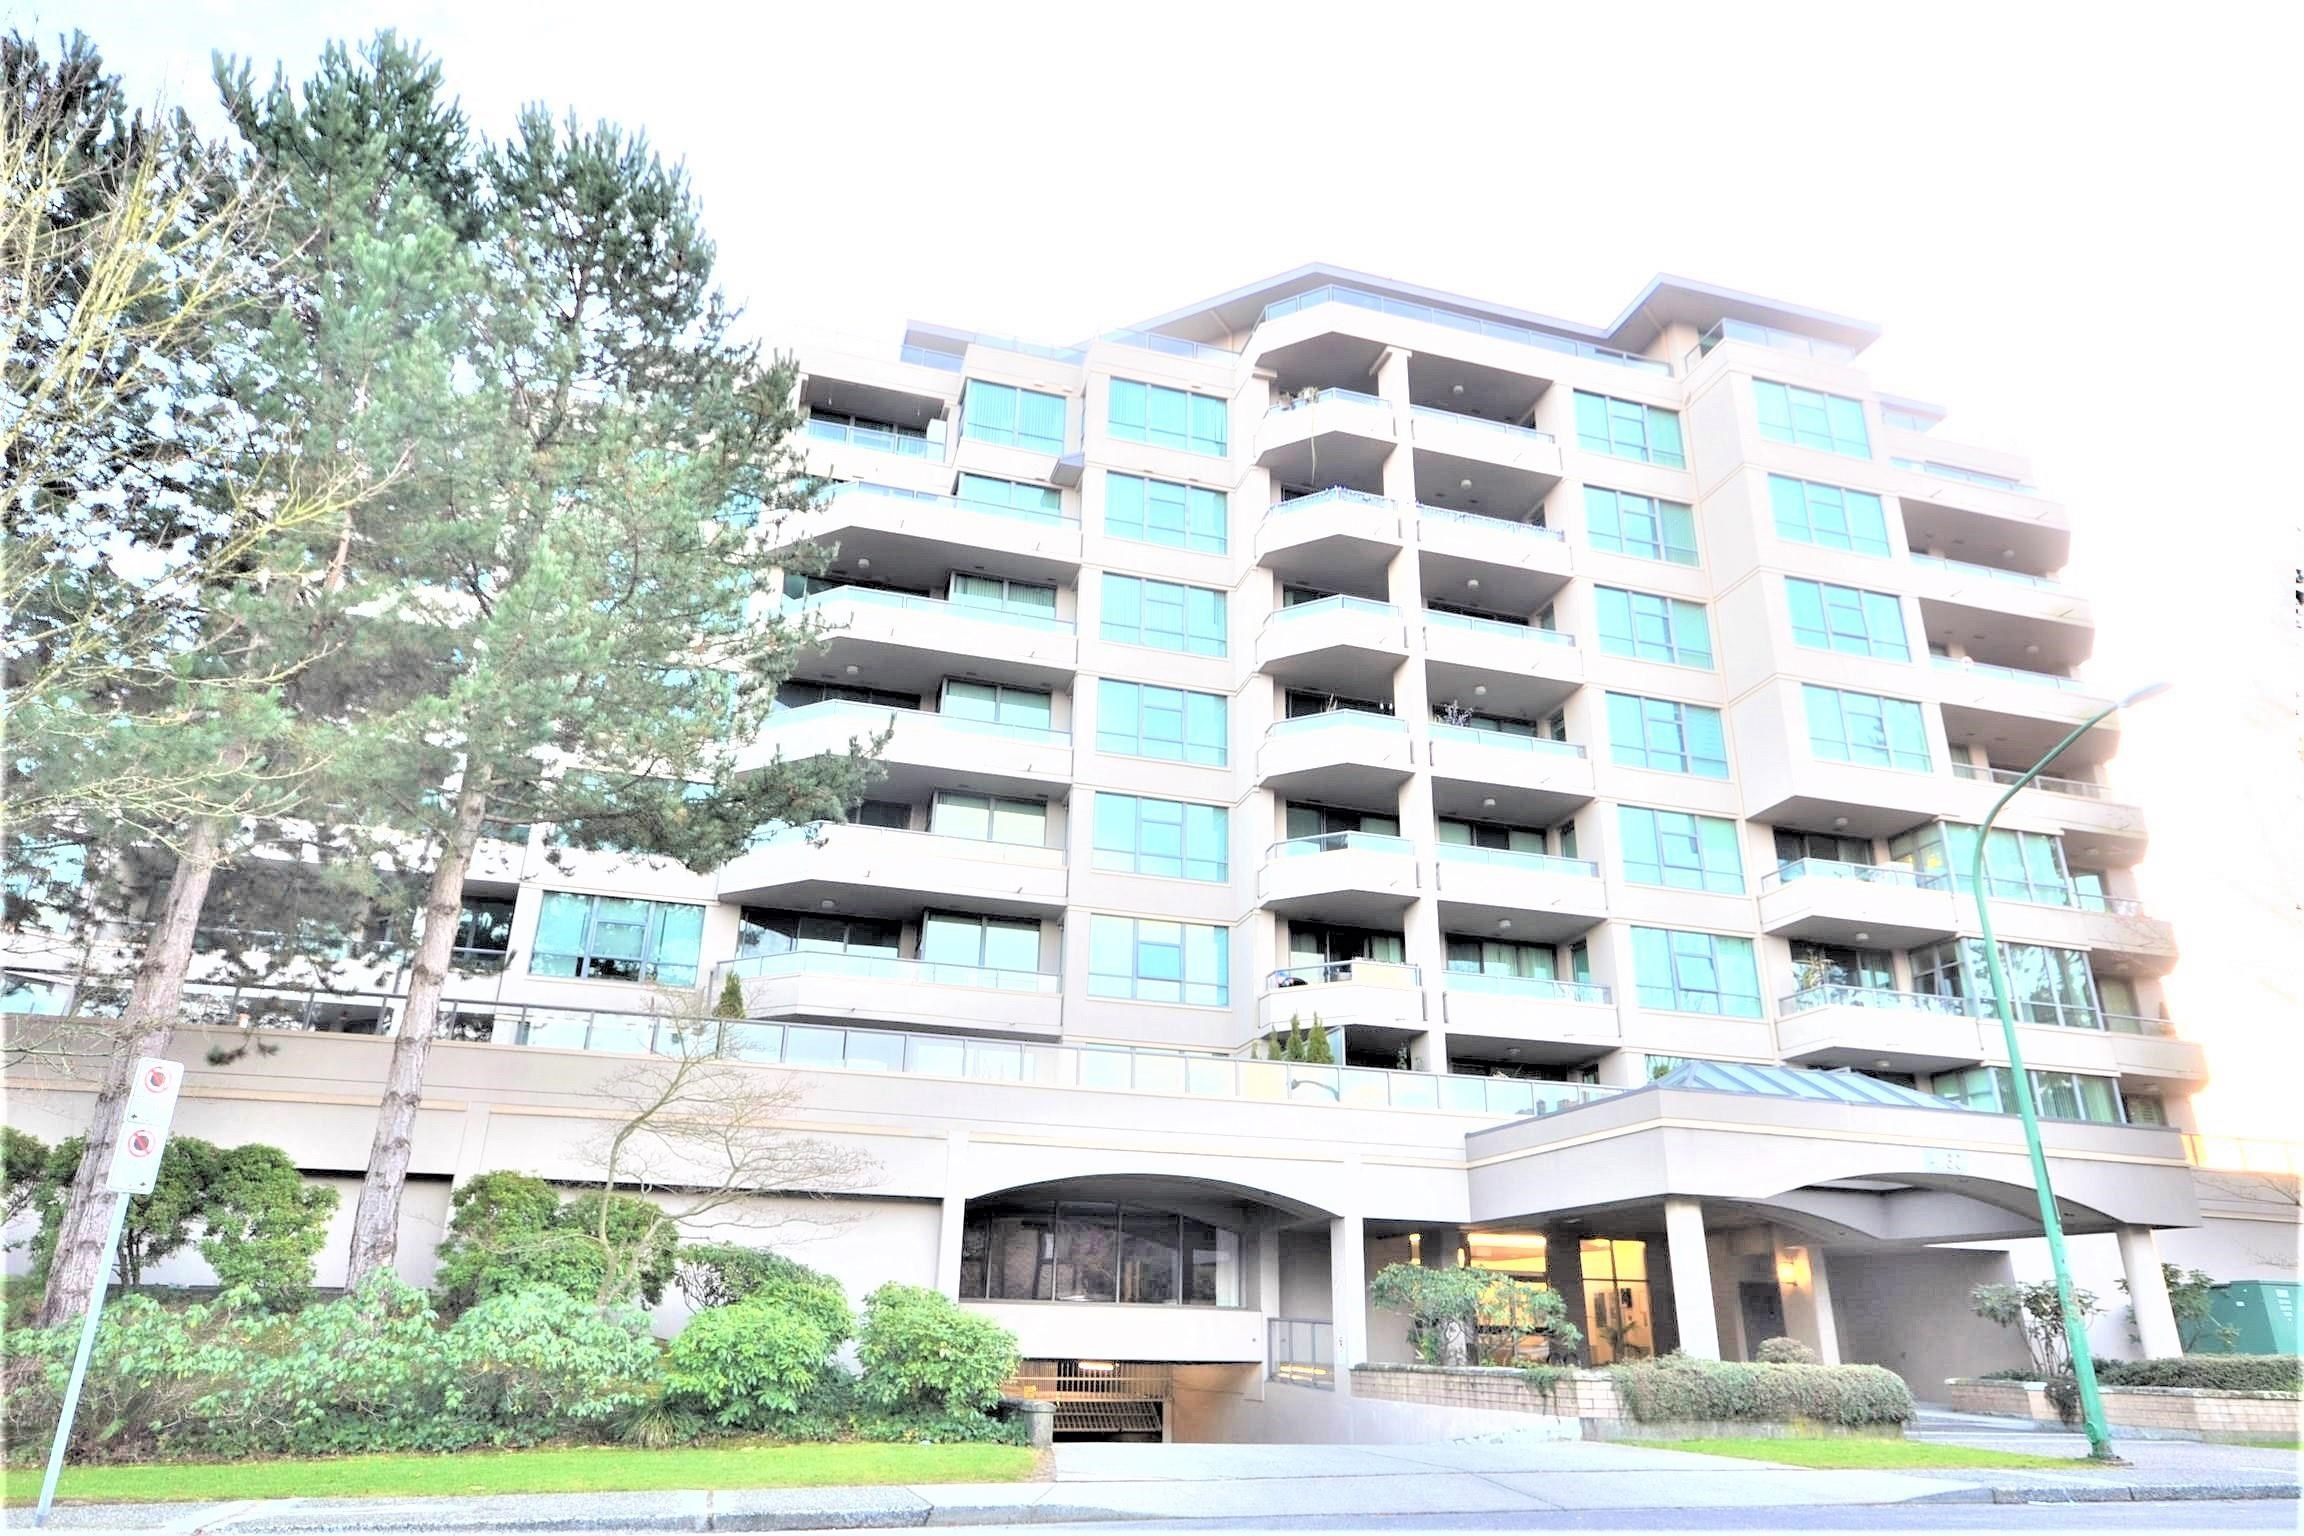 Main Photo: 501 4160 ALBERT STREET in Burnaby: Vancouver Heights Condo for sale (Burnaby North)  : MLS®# R2646313